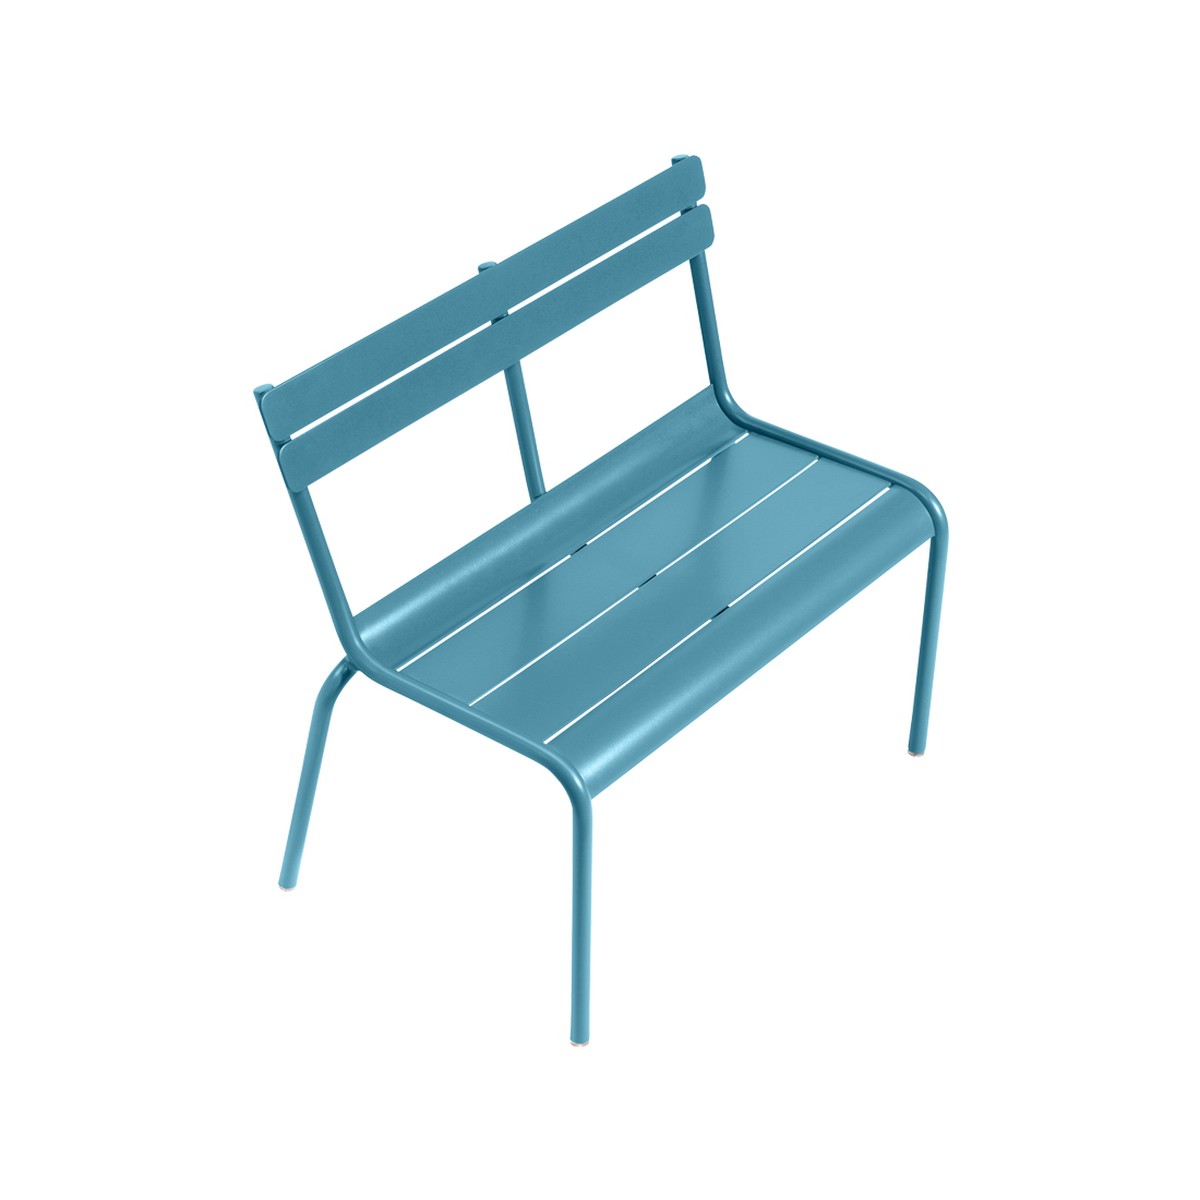 Fermob LUXEMBOURG KID Banc Luxembourg Kid Bleu turquoise 58.5x55cm